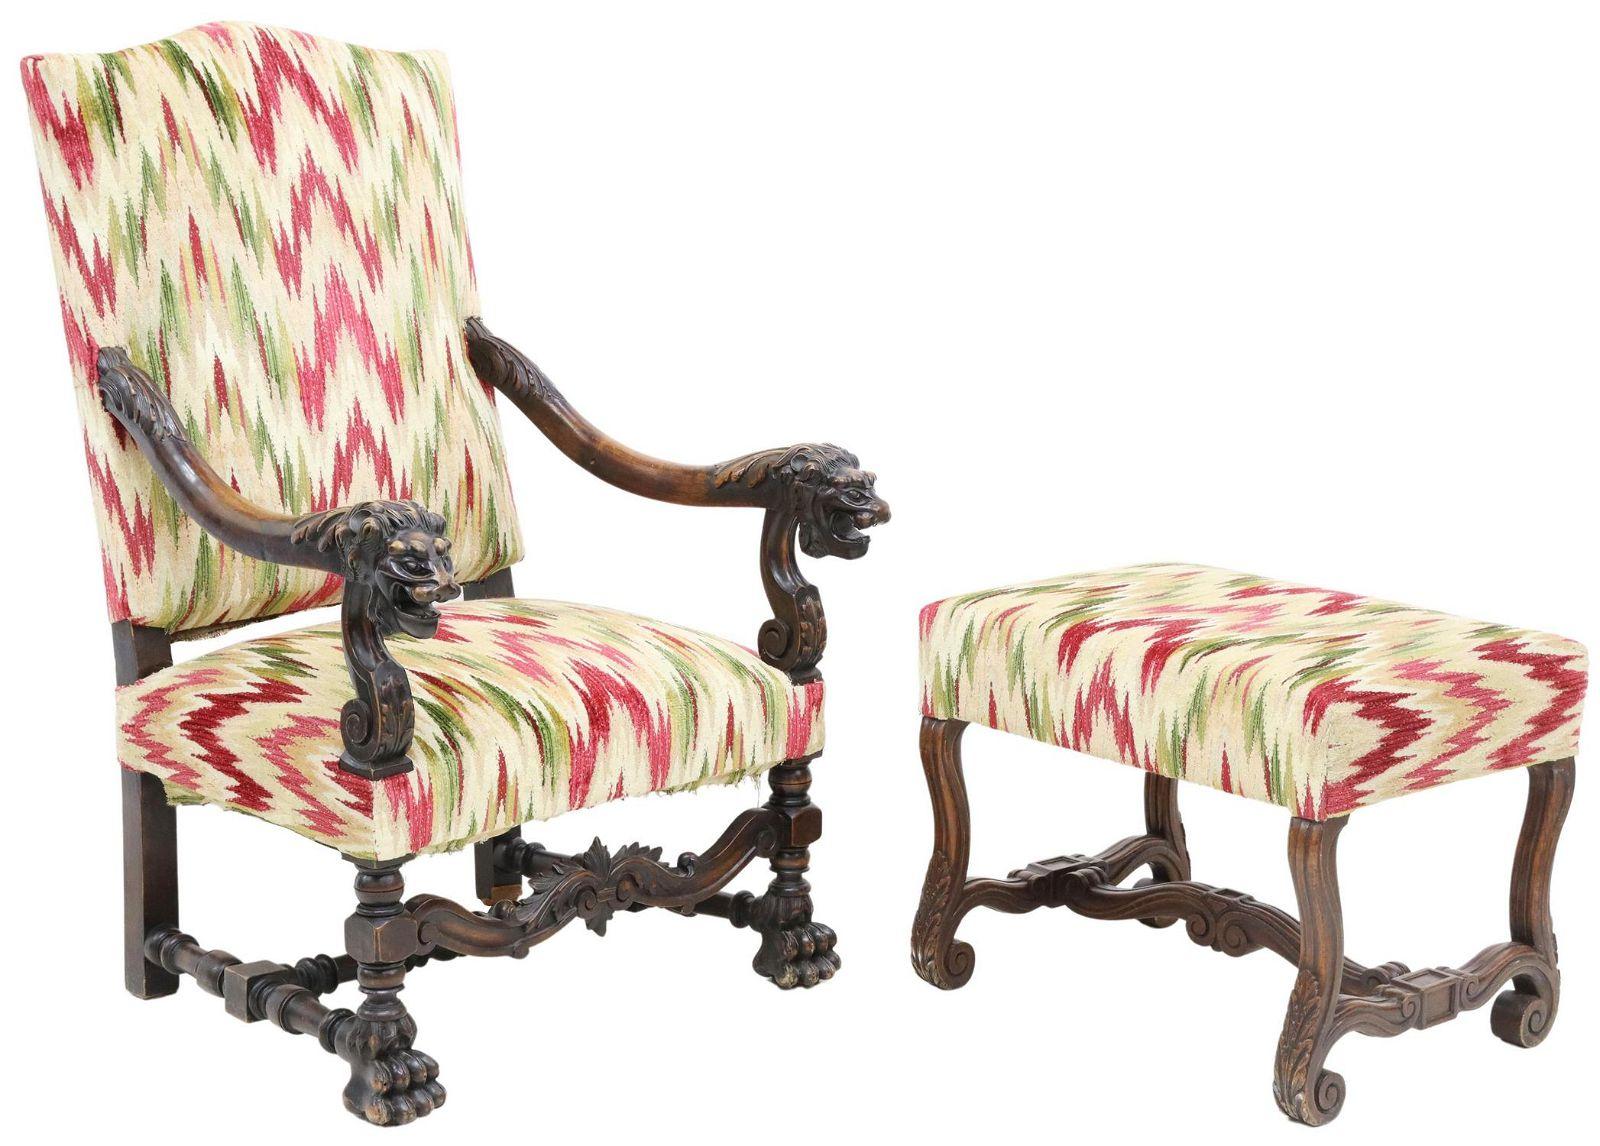 French upholstered armchair and ottoman, 19th c. Baroque style armchair, back and seat in flame stitch style upholstery. The armchair features detailed carved lion's head handholds, rising on turned legs, joined with H stretcher, foliate carved